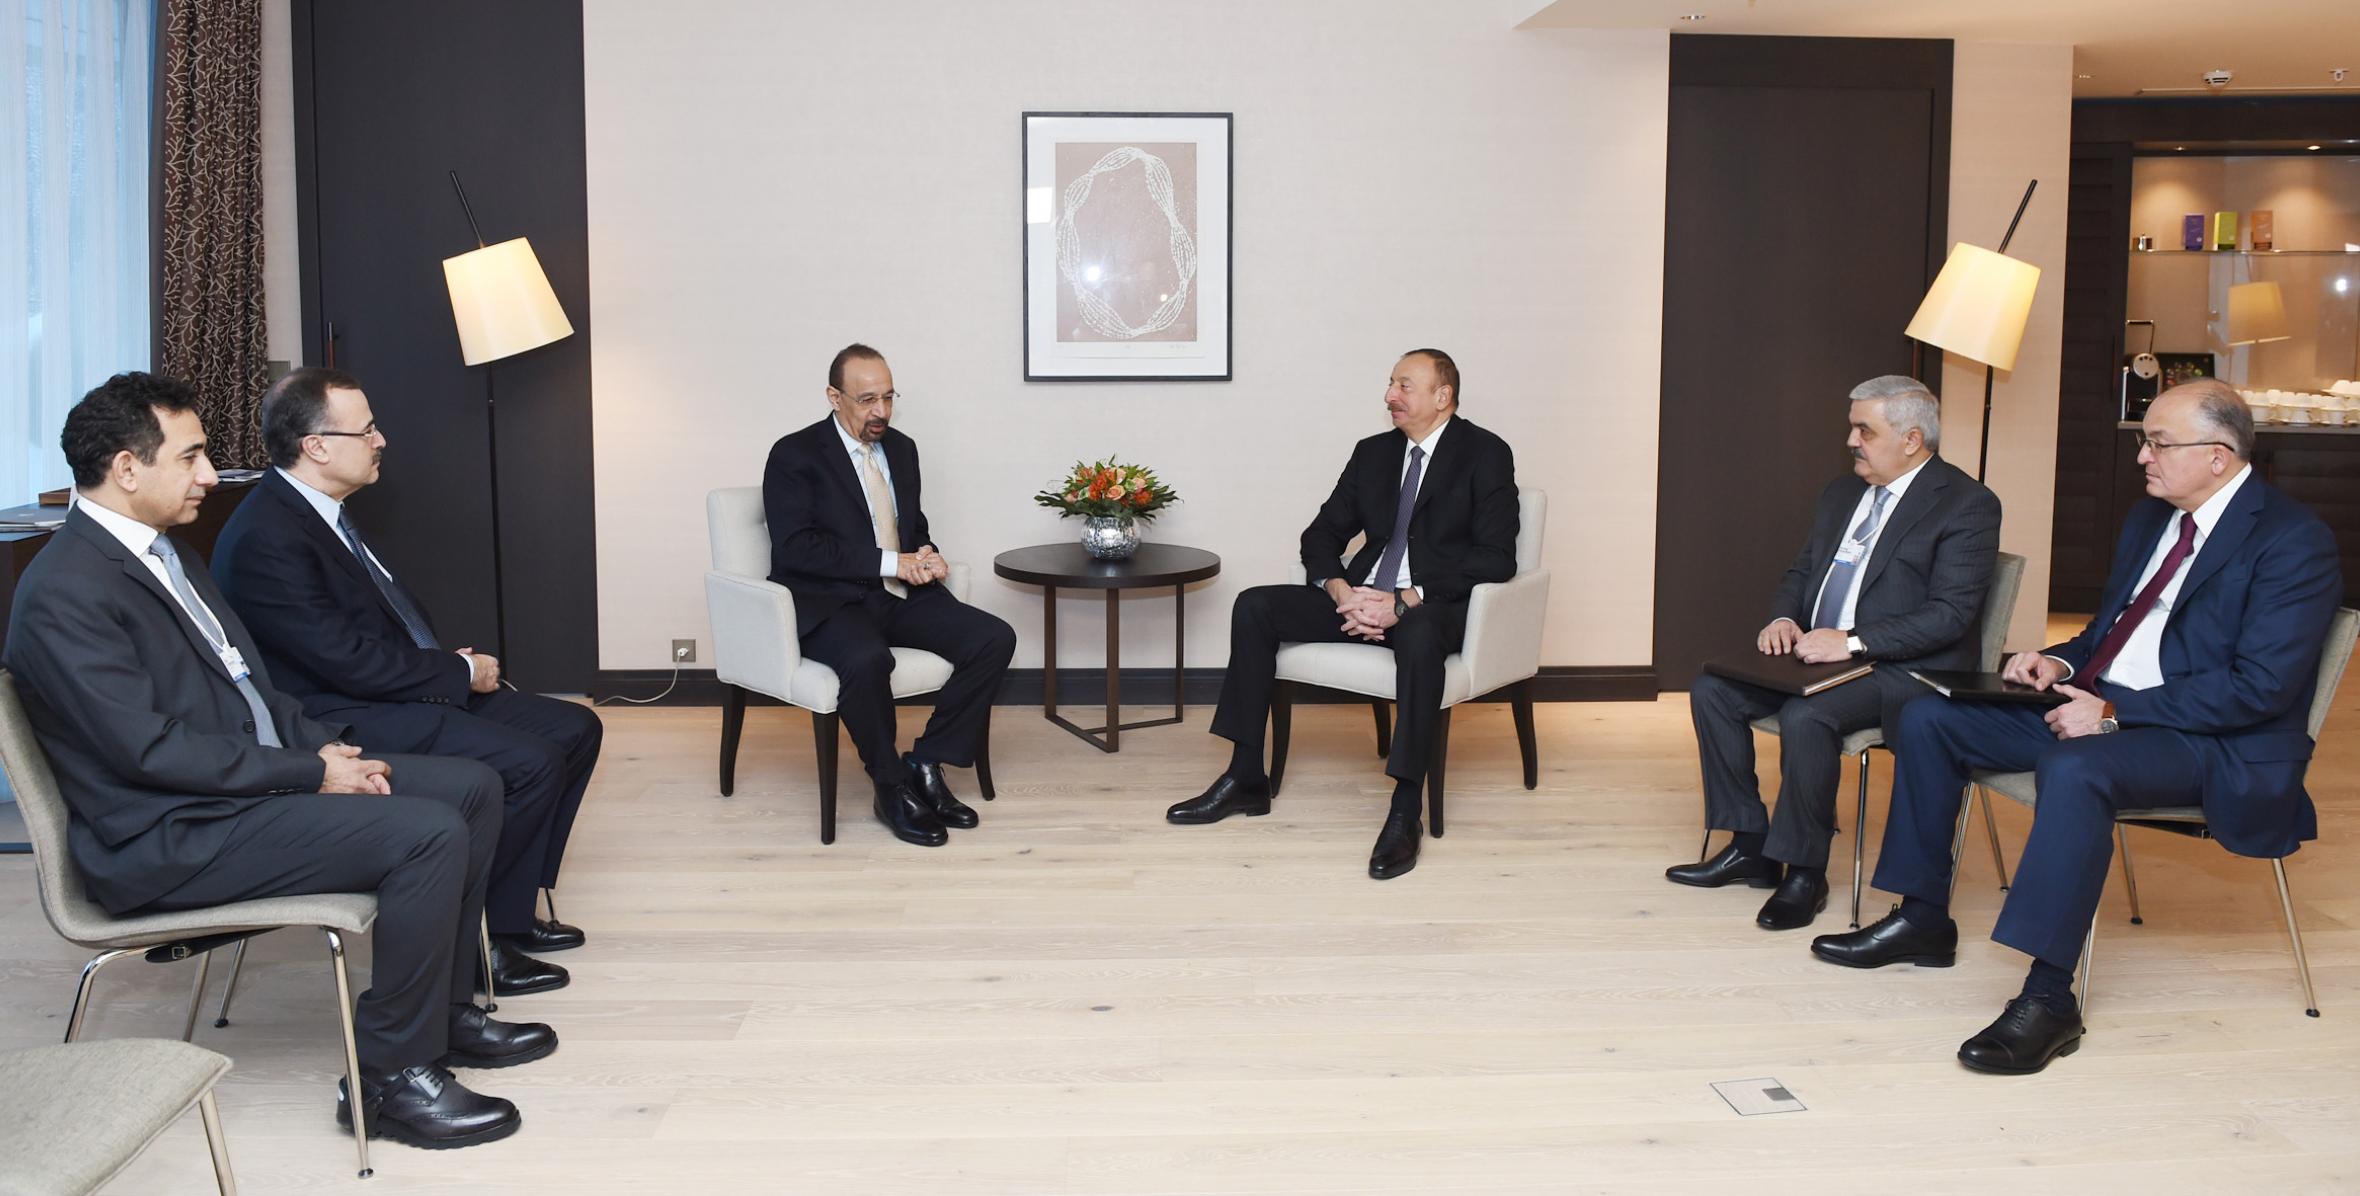 Ilham Aliyev met with Saudi Arabia's Minister of Energy, Industry and Mineral Resources in Davos